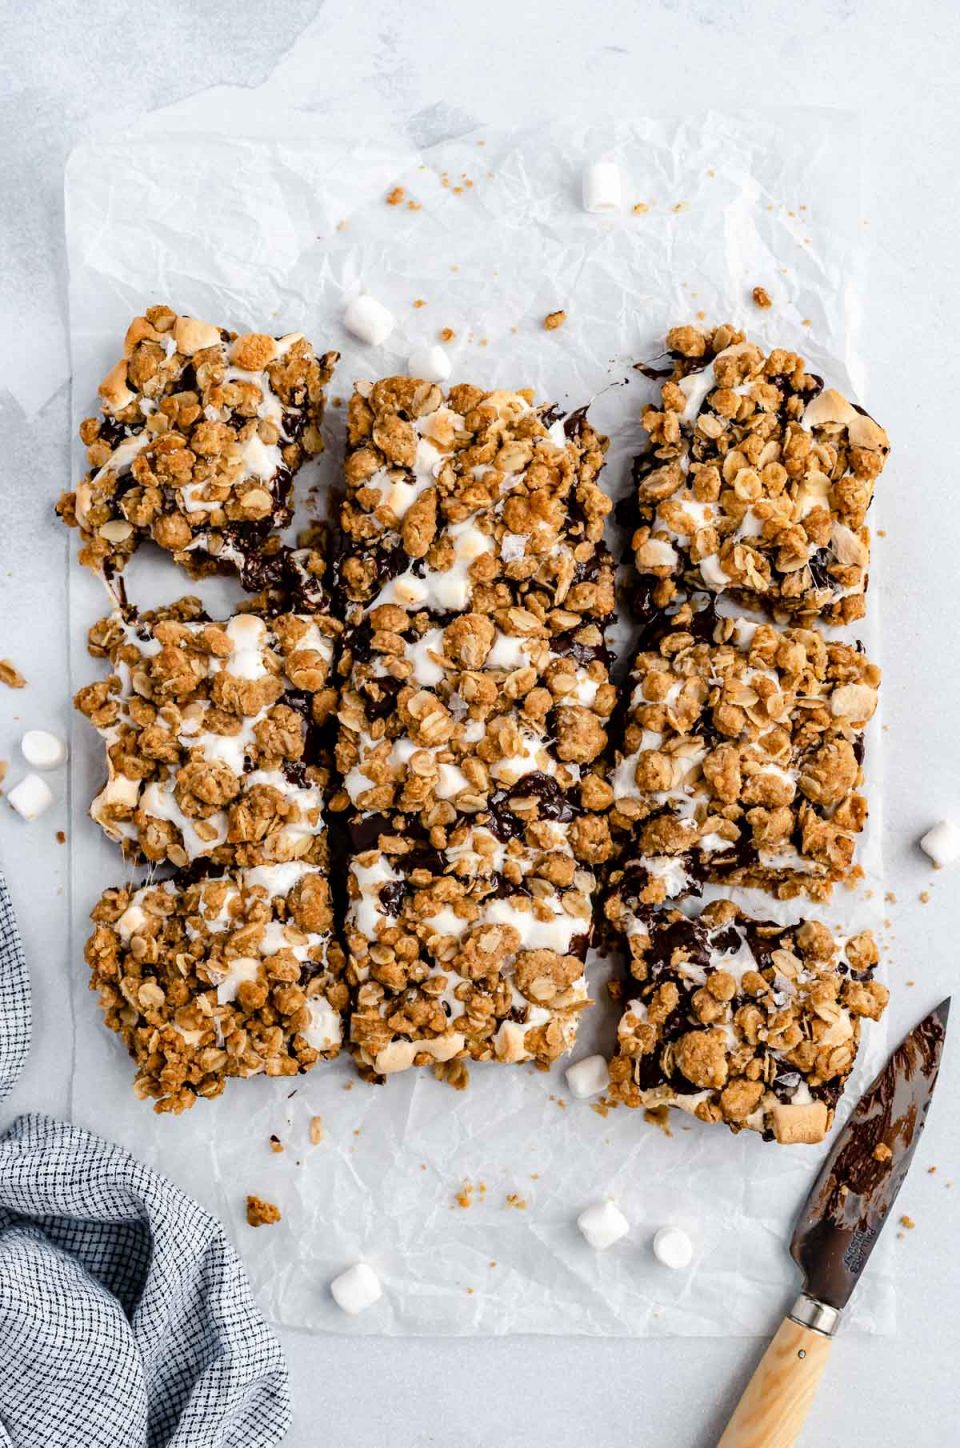 Sliced gooey s'mores crumble bars arranged on a piece of parchment paper atop a white surface. Crumbs & marshmallows are scattered around the bars, as well as a small paring knife that's covered in melted dark chocolate from slicing the bars.